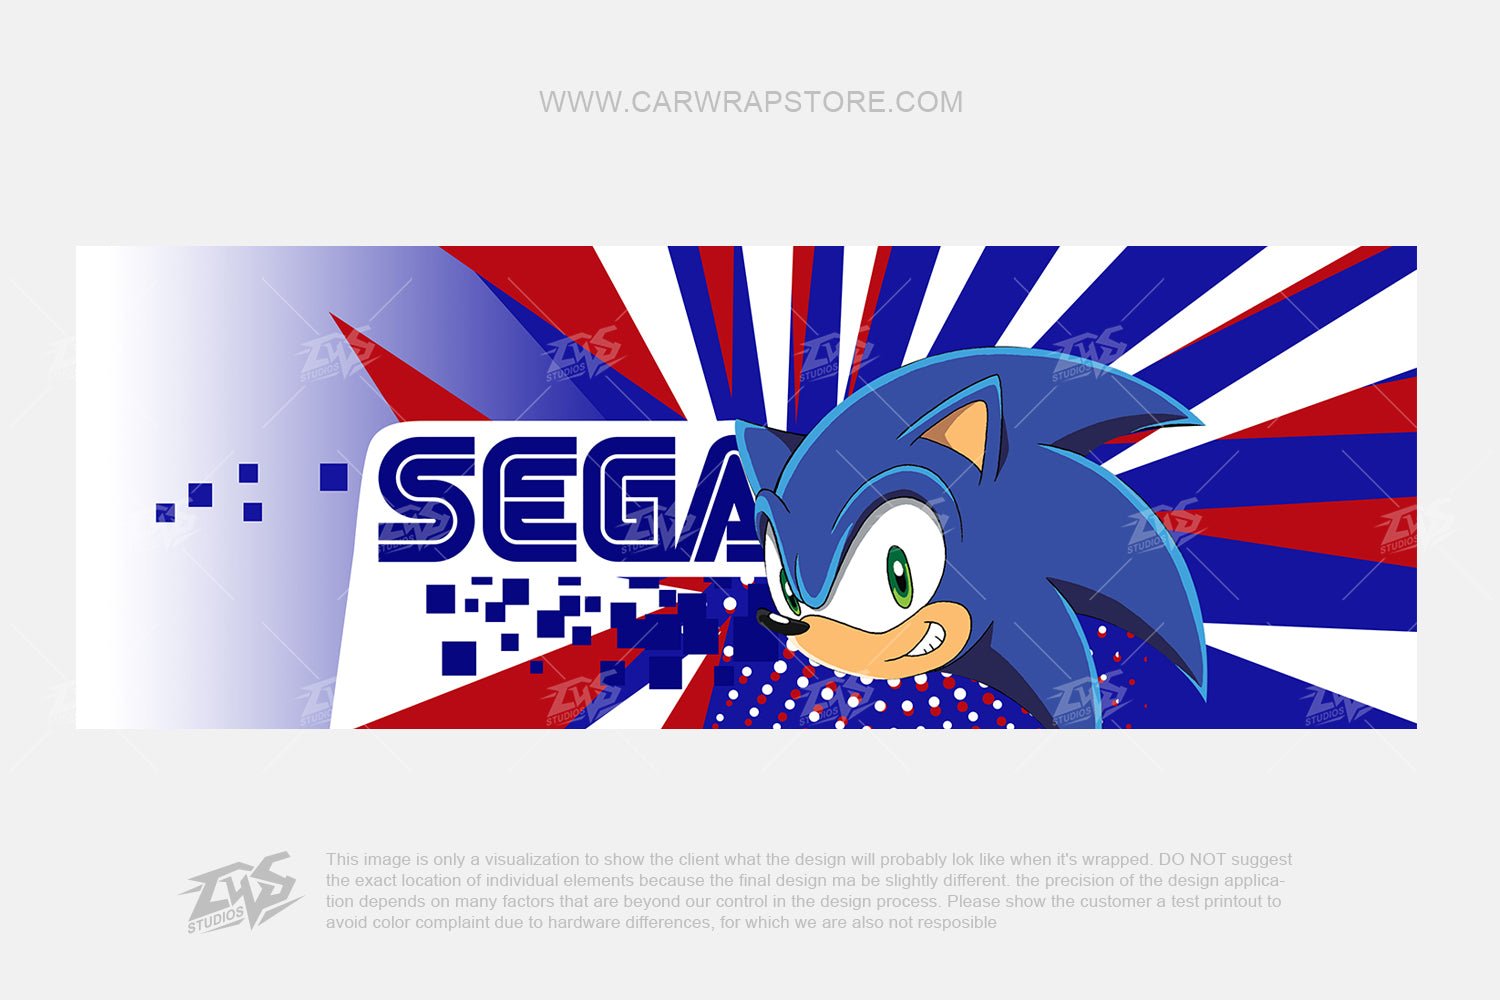 /images/sonic-the-hedgehog-sn